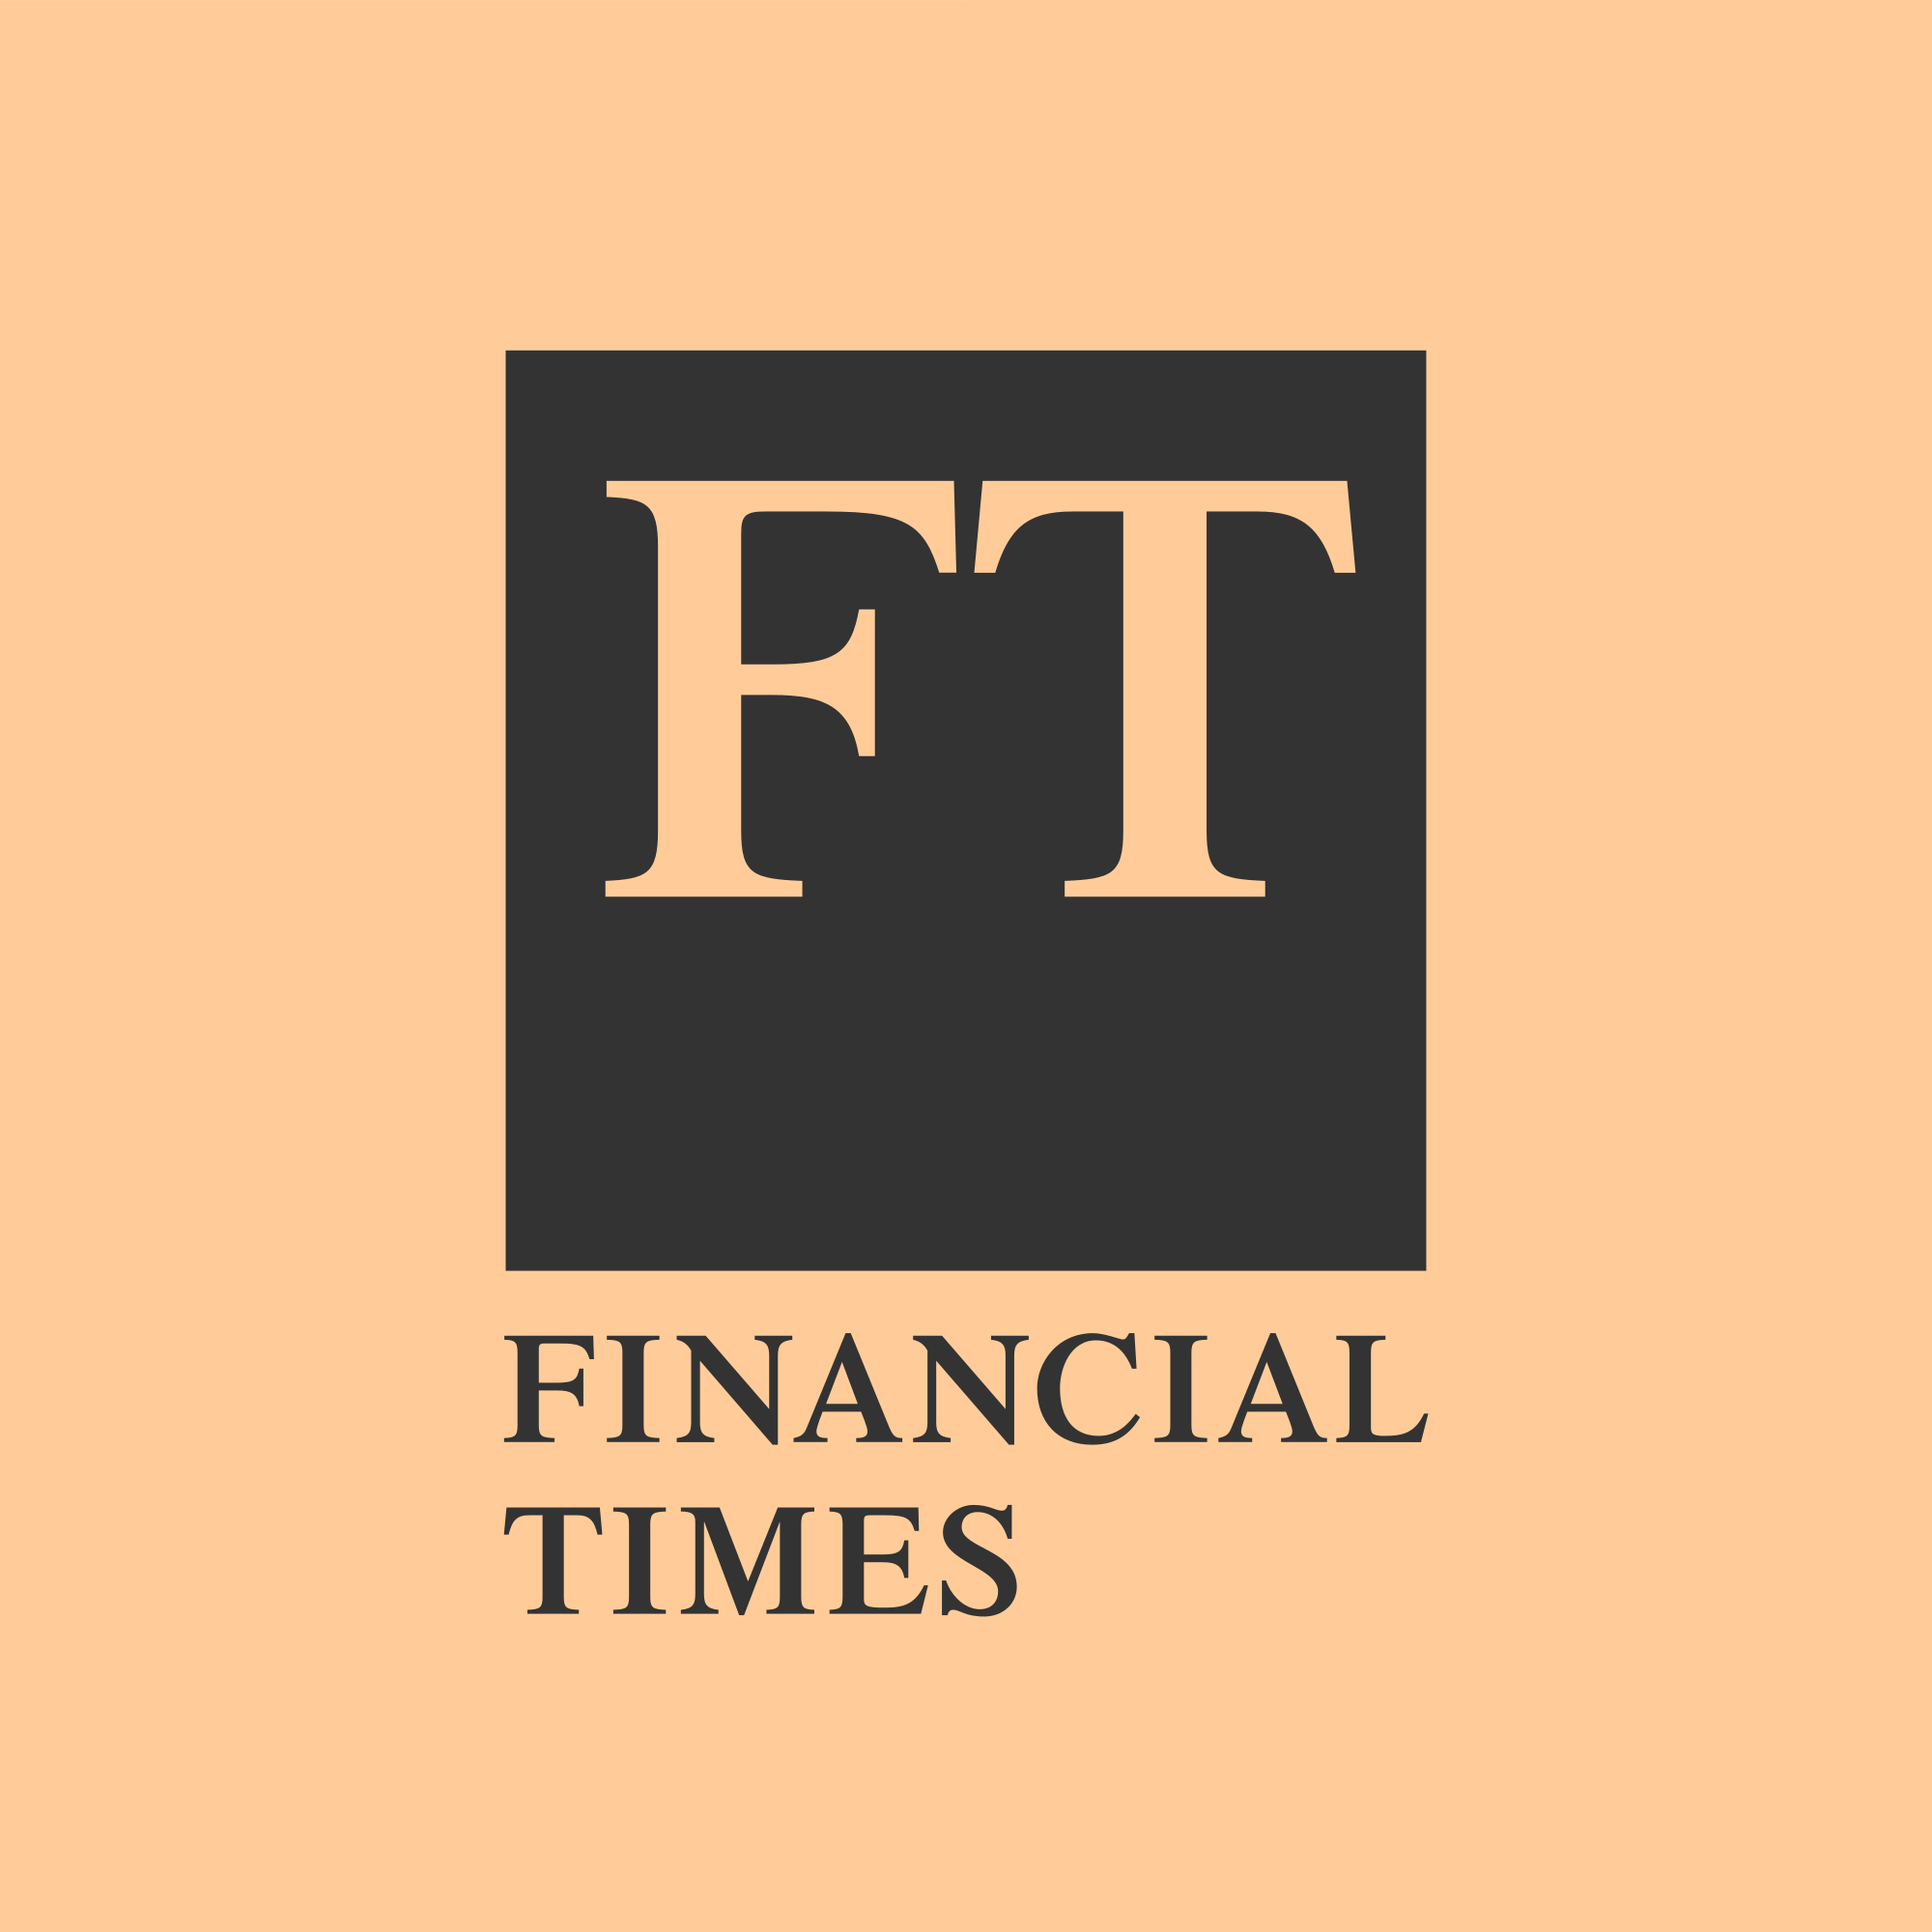 Financial_Times_corporate_logo_(pink).svg